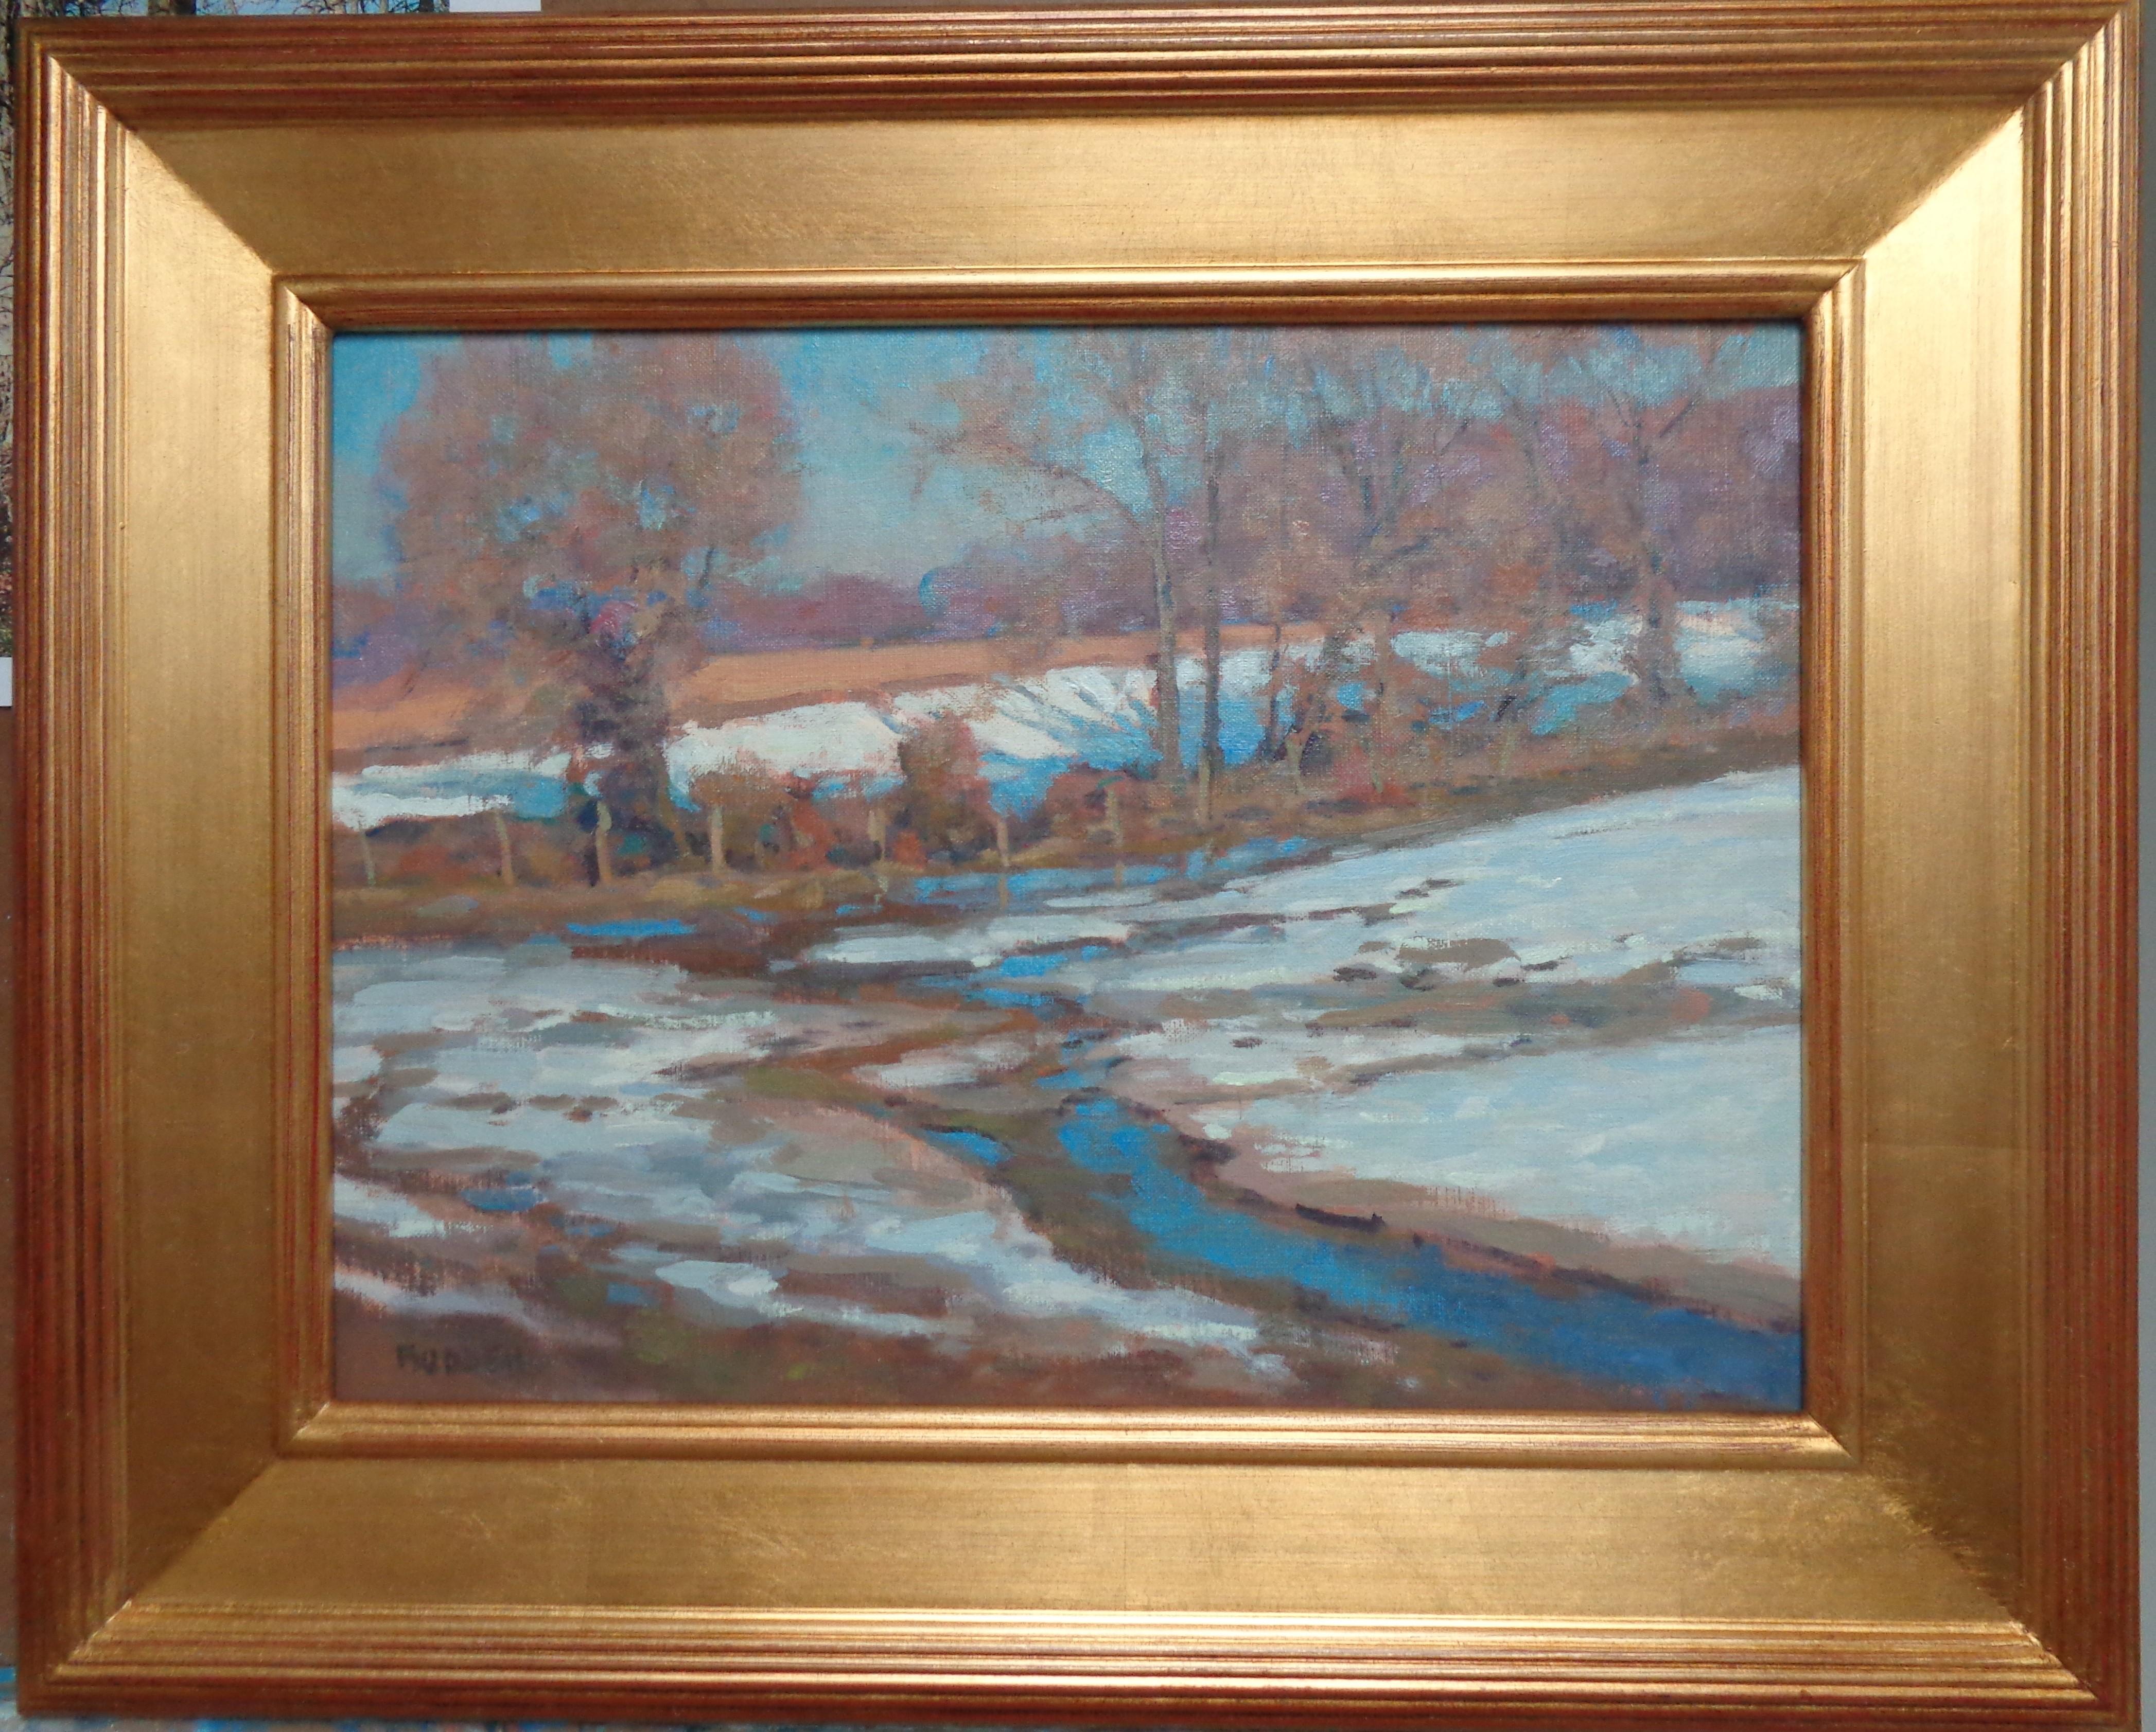 Winter Sun
oil/ canvas panel
12 x 16 image unframed, 18.5 x 22.5 framed
I enjoy playing with light in my paintings and creating a mood while trying to push the range of color using subtle transitions like in the snow and water reflections here in